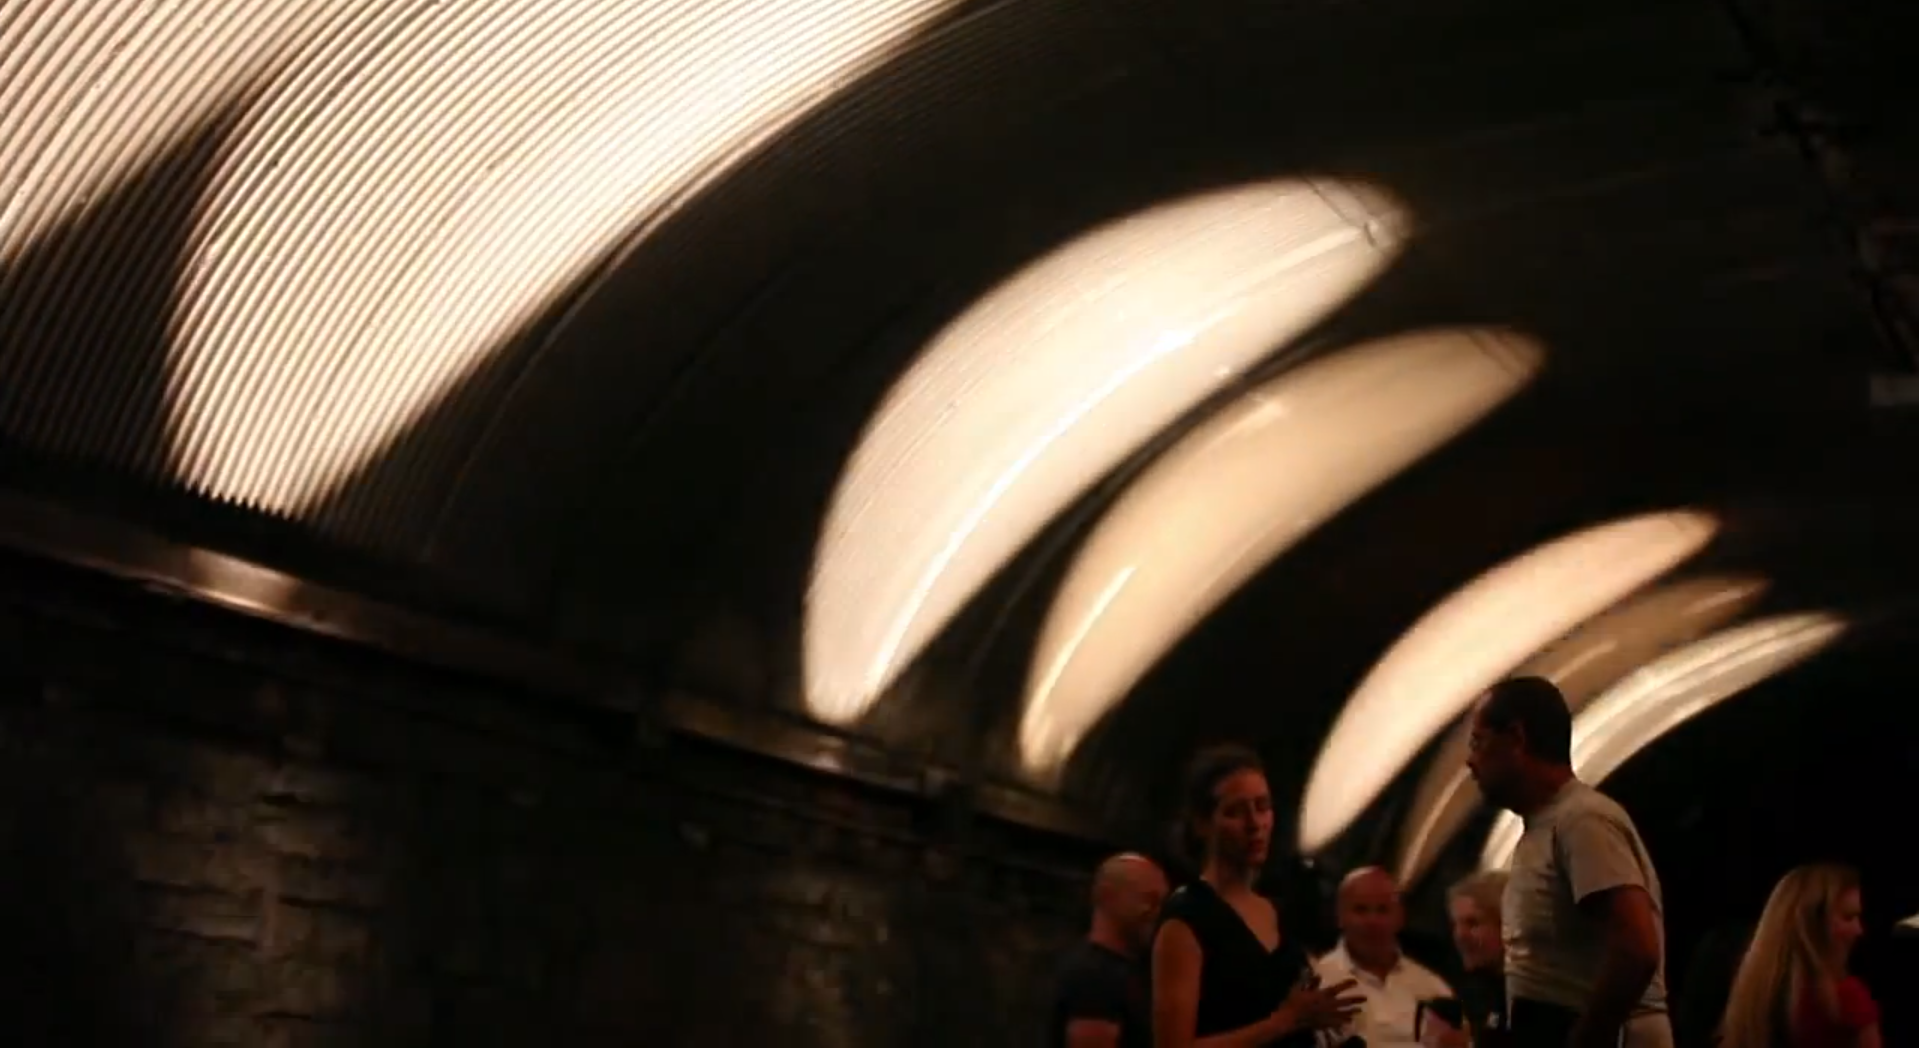 Light Show Lets You Walk Through This Tunnel For The First Time Ever